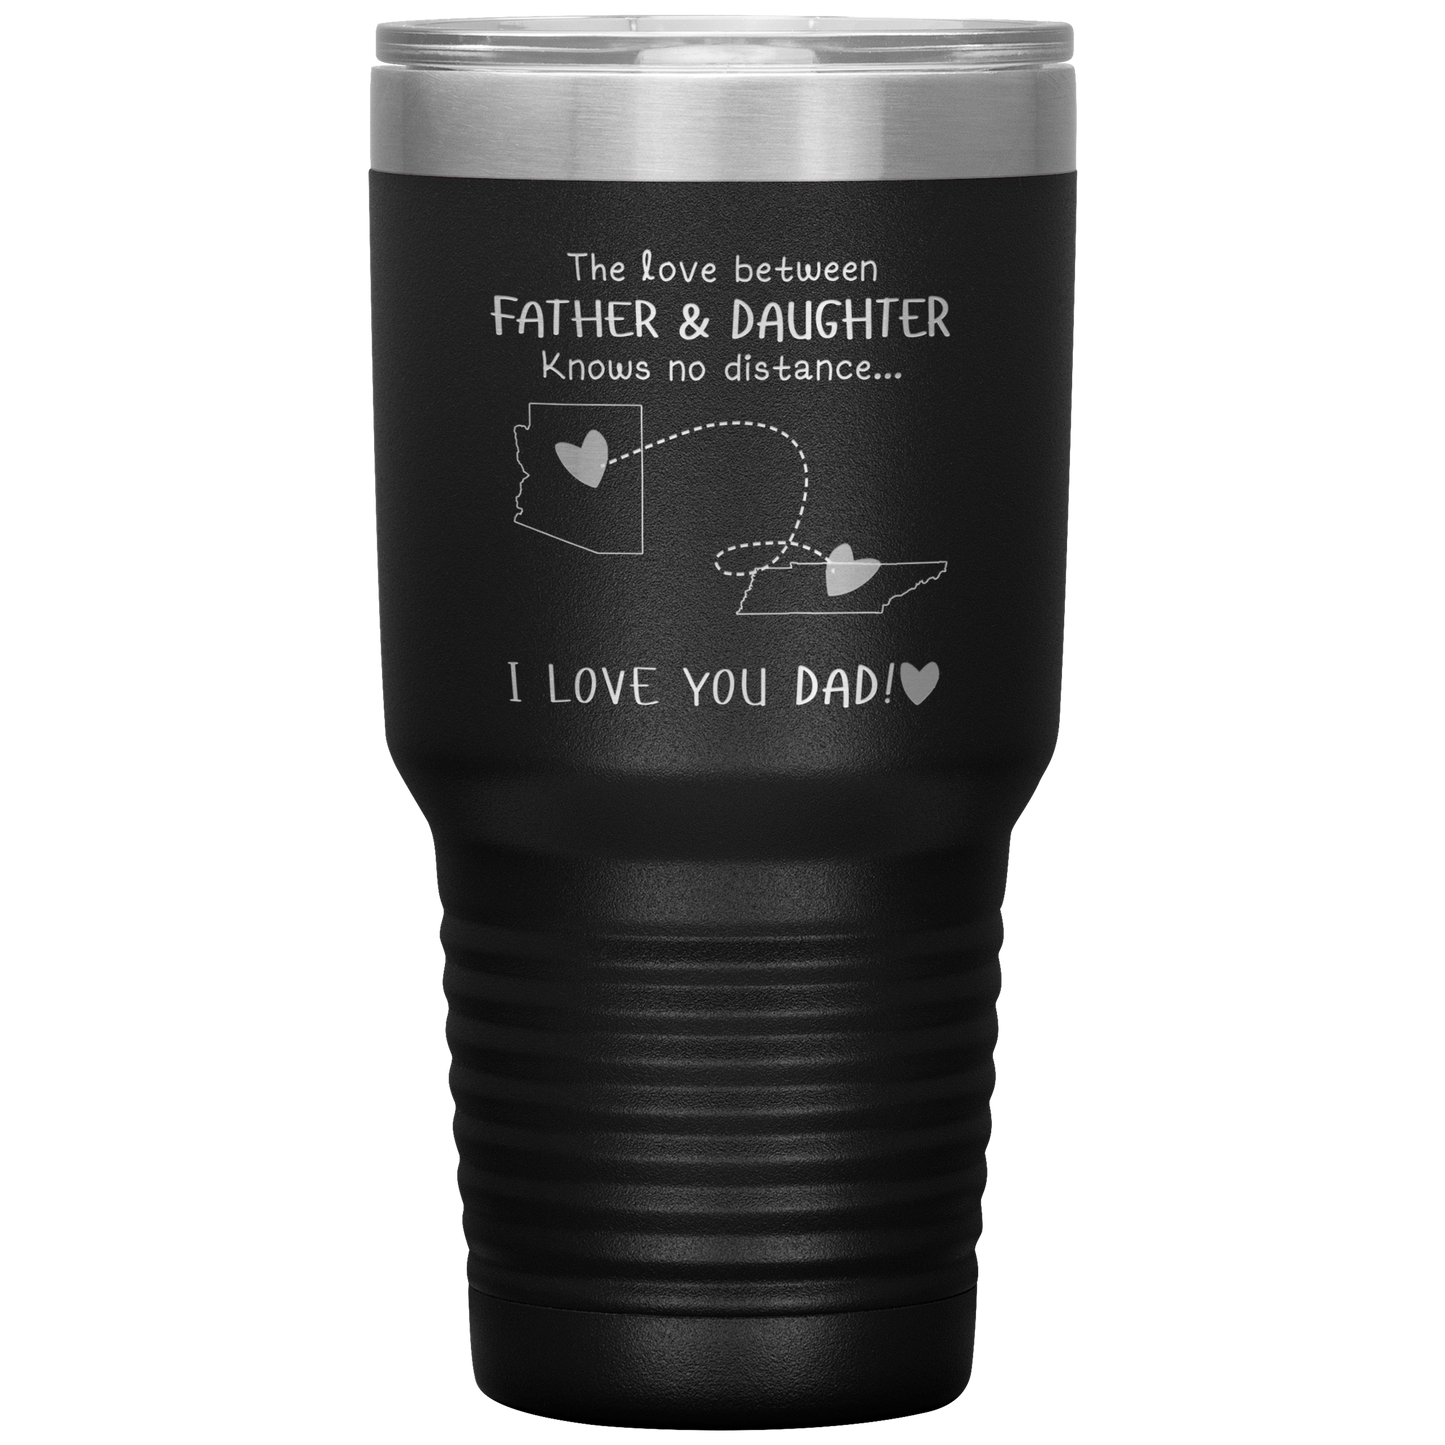 HNV-CUS-GRAND-sp-31100 - [ Arizona | Tennessee ] (Tumbler_30oz) Fathers Day Gifts Personalized Fathers Day Gifts Coffee Mug